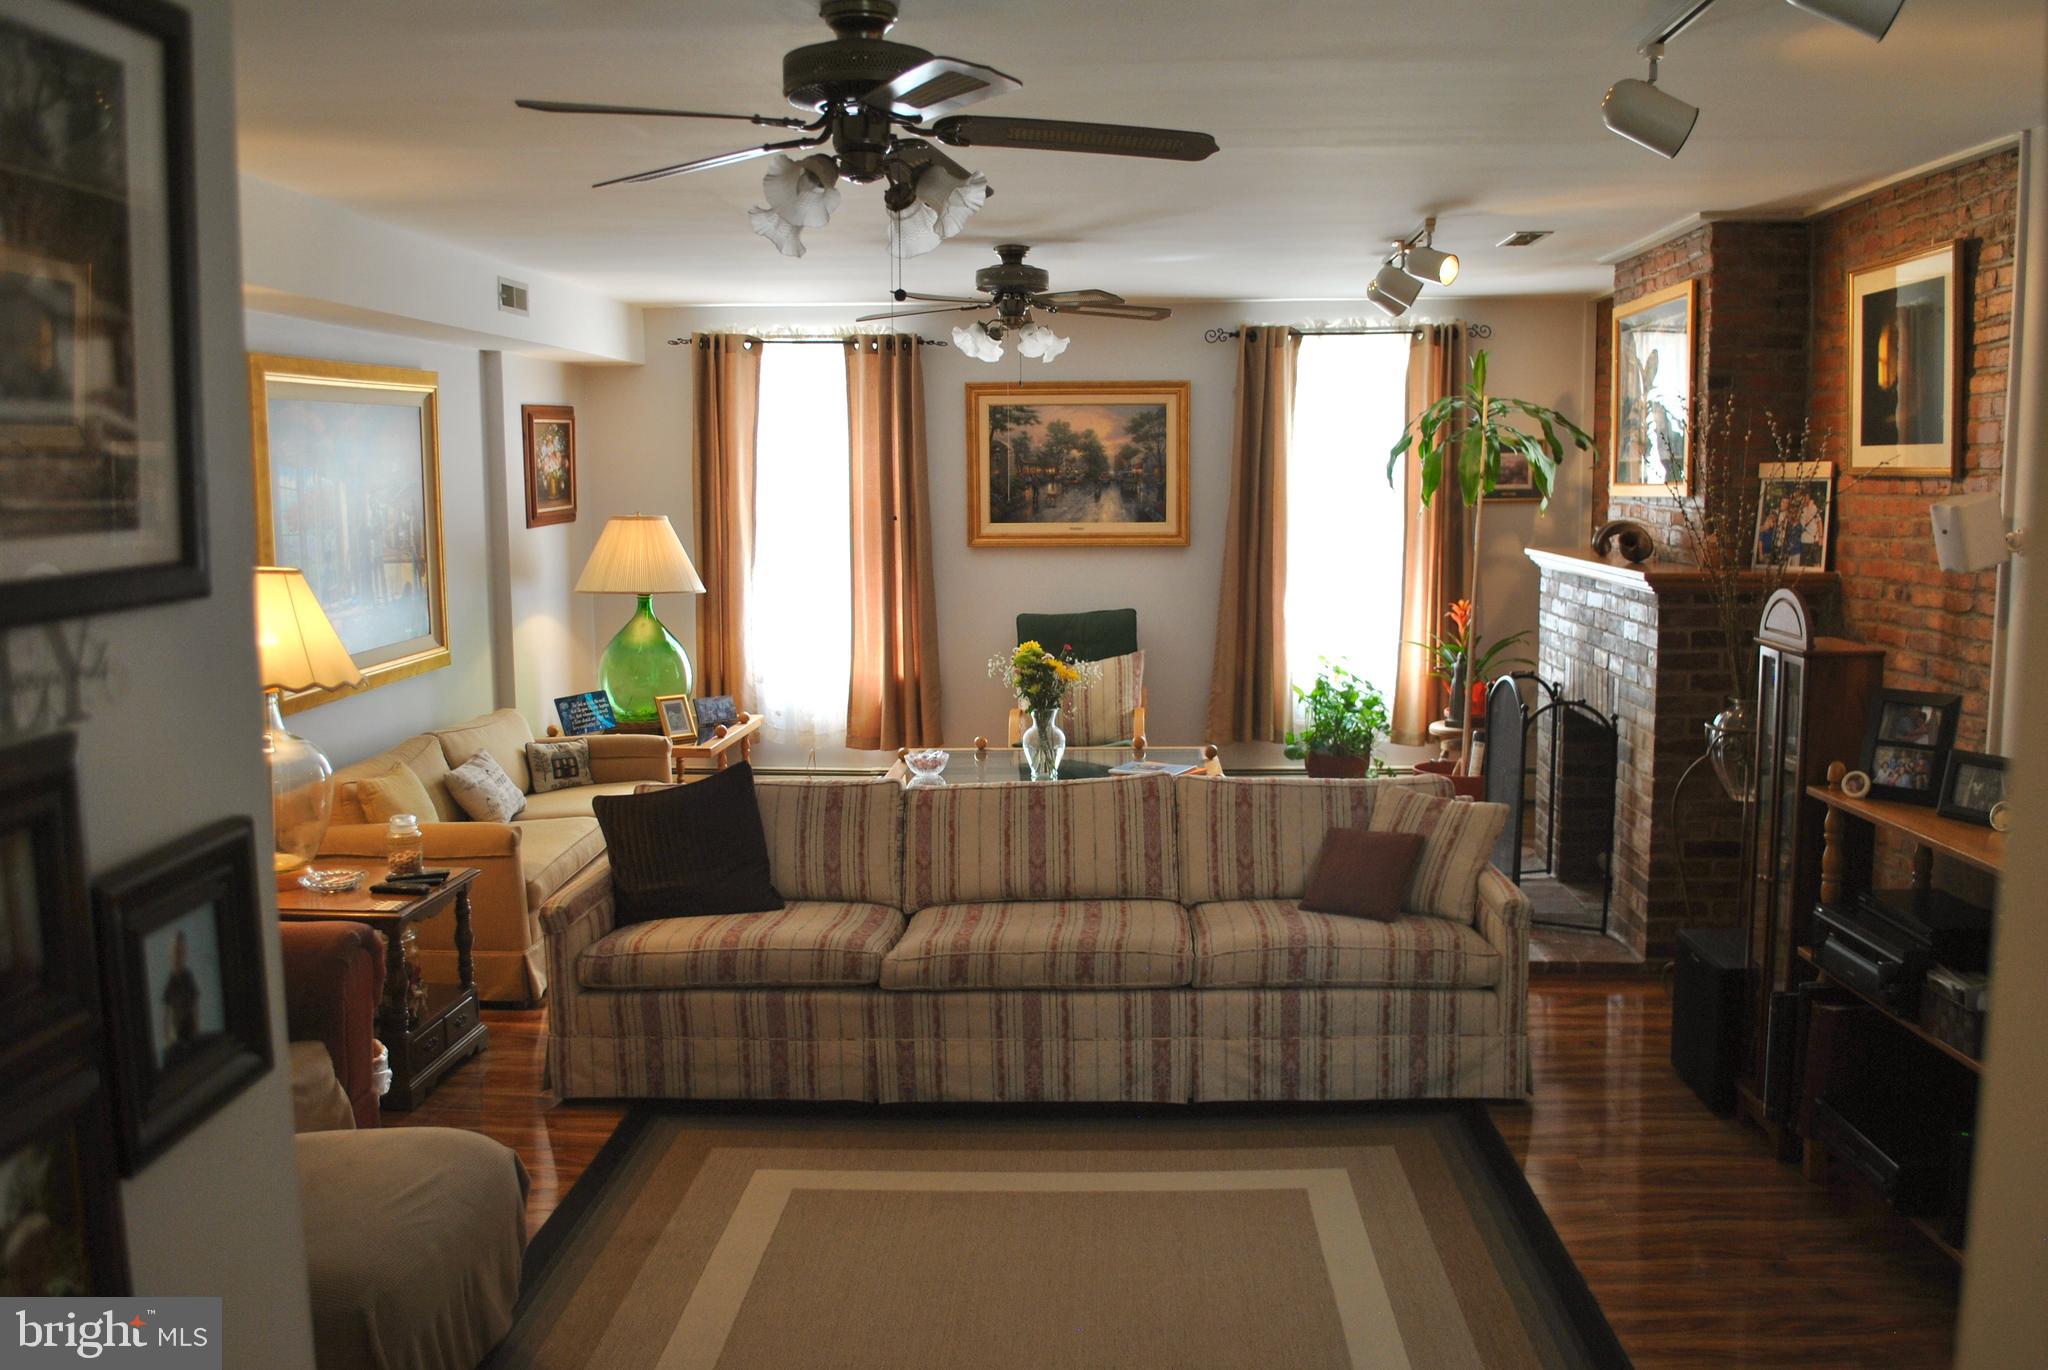 a living room with furniture ceiling fan and a rug